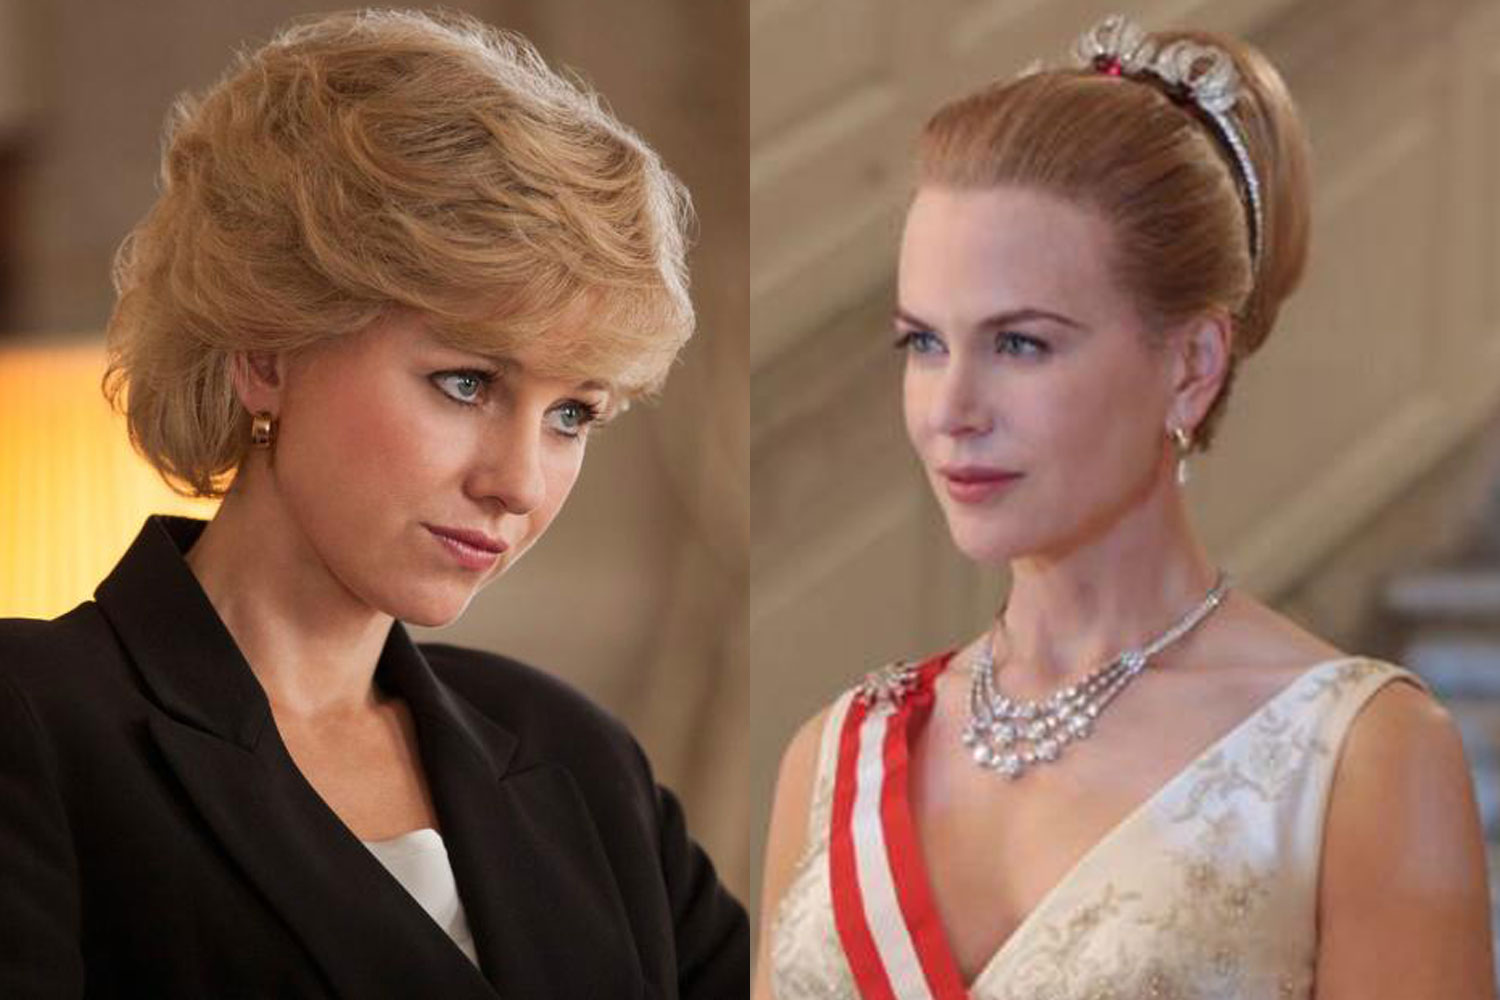 From left: Naomi Watts as Princess Diana in Diana, and Nicole Kidman as Princess Grace in Grace of Monaco.